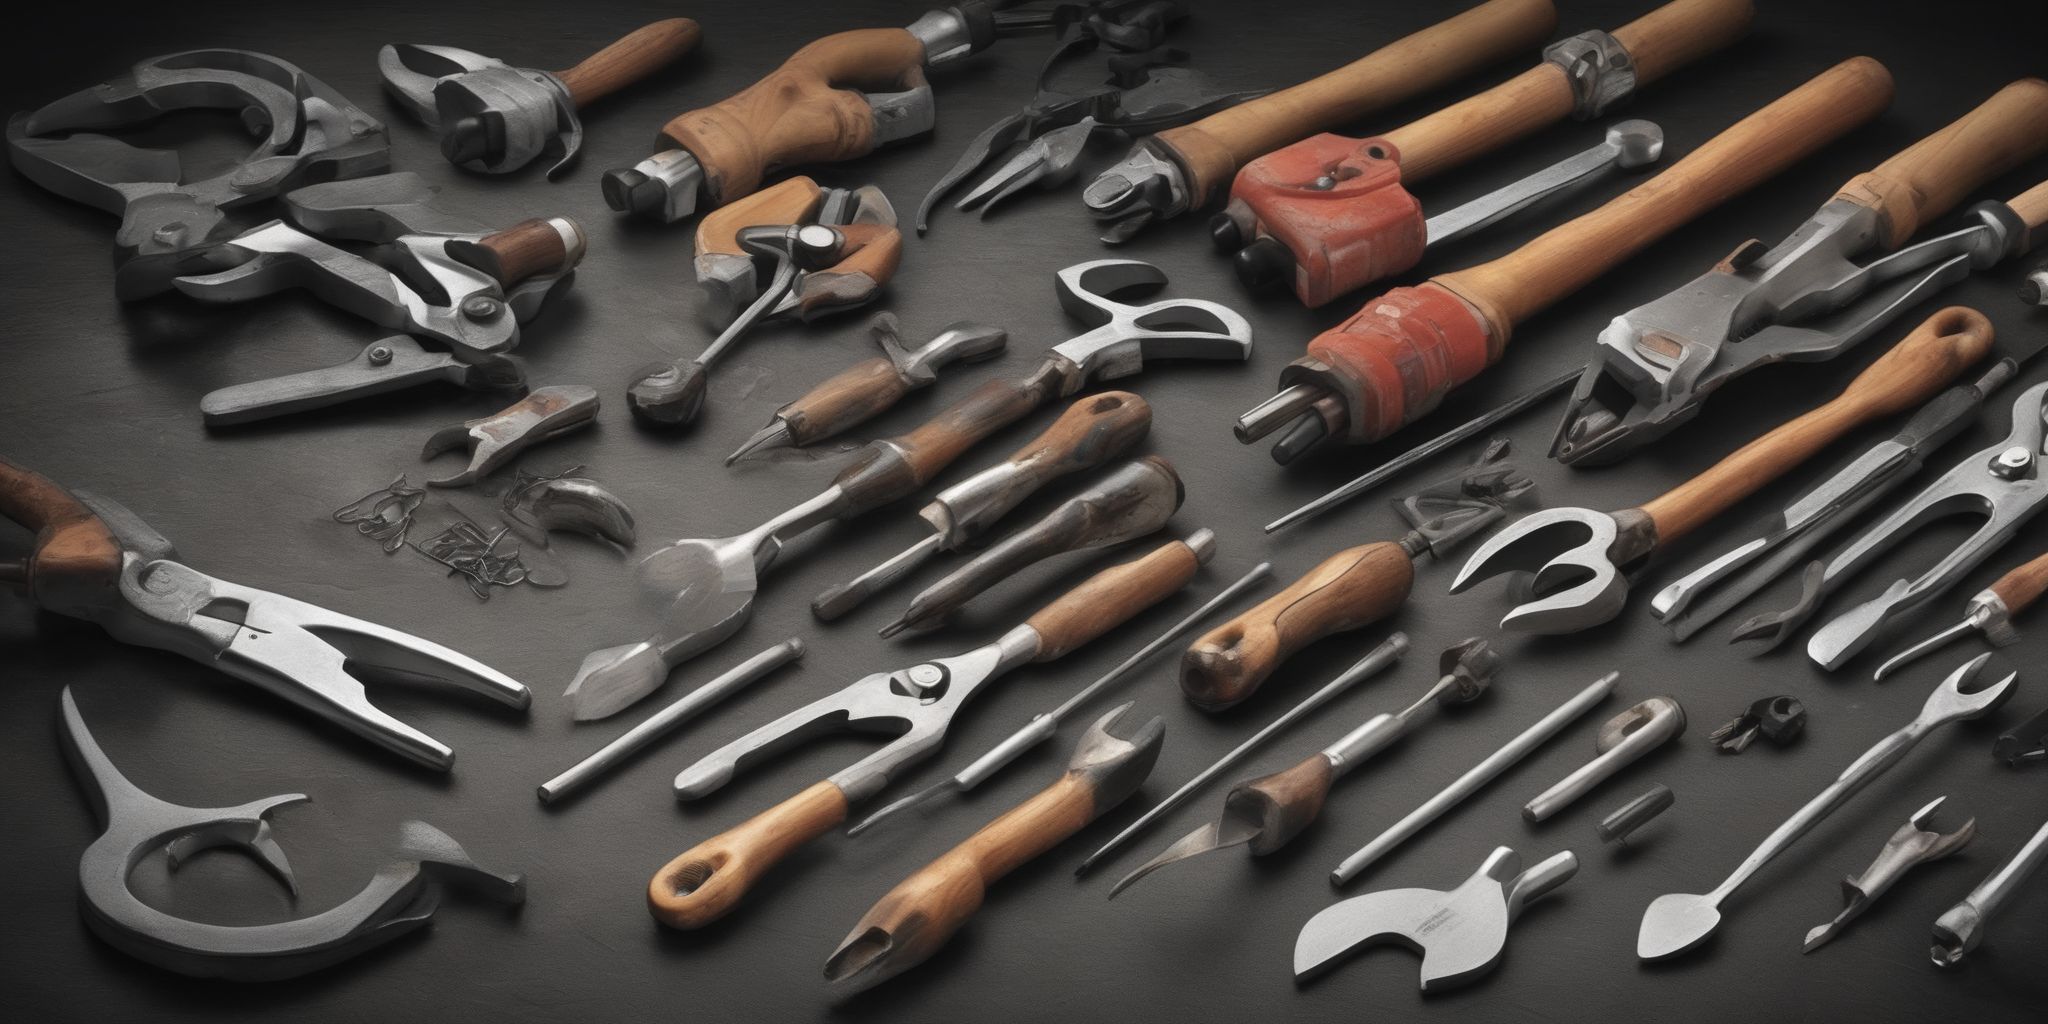 Tools  in realistic, photographic style